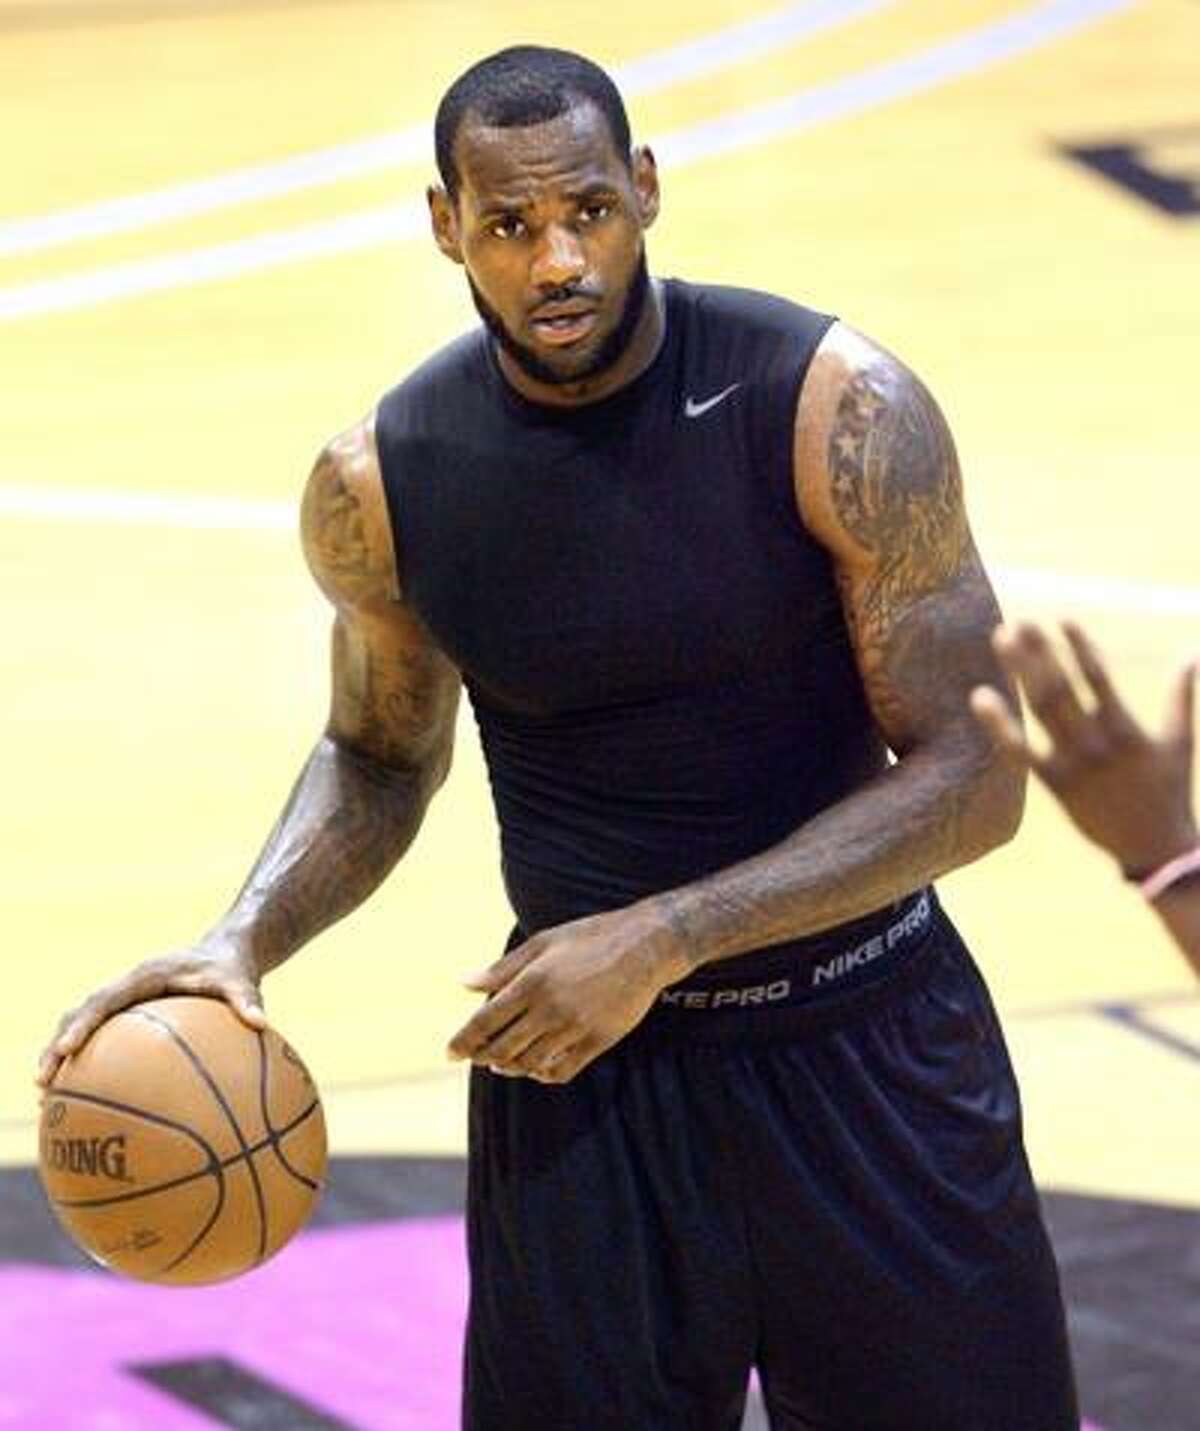 LeBron James takes part in evening workout games with high school basketball players at his skills academy Tuesday in Akron, Ohio. James, a free agent, is being courted by several NBA teams. (AP)